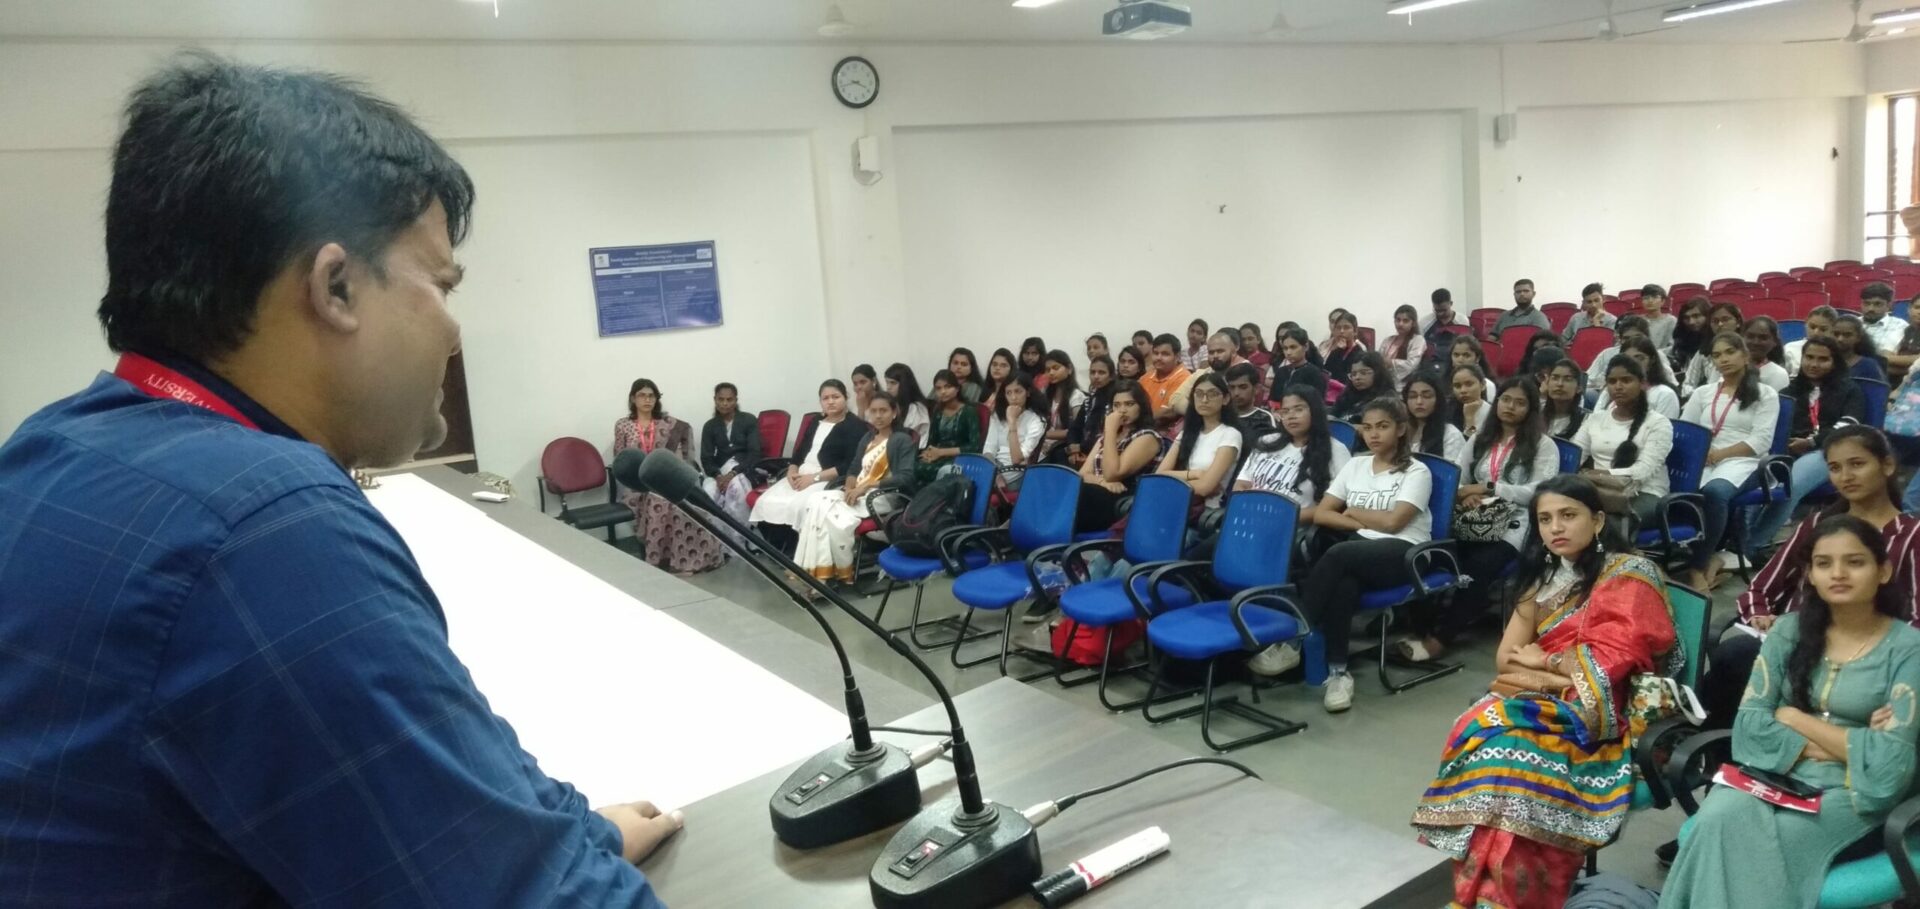 Expert Lecture on Public Speaking and Soft Skills Development by Dr Siddharth Shankar